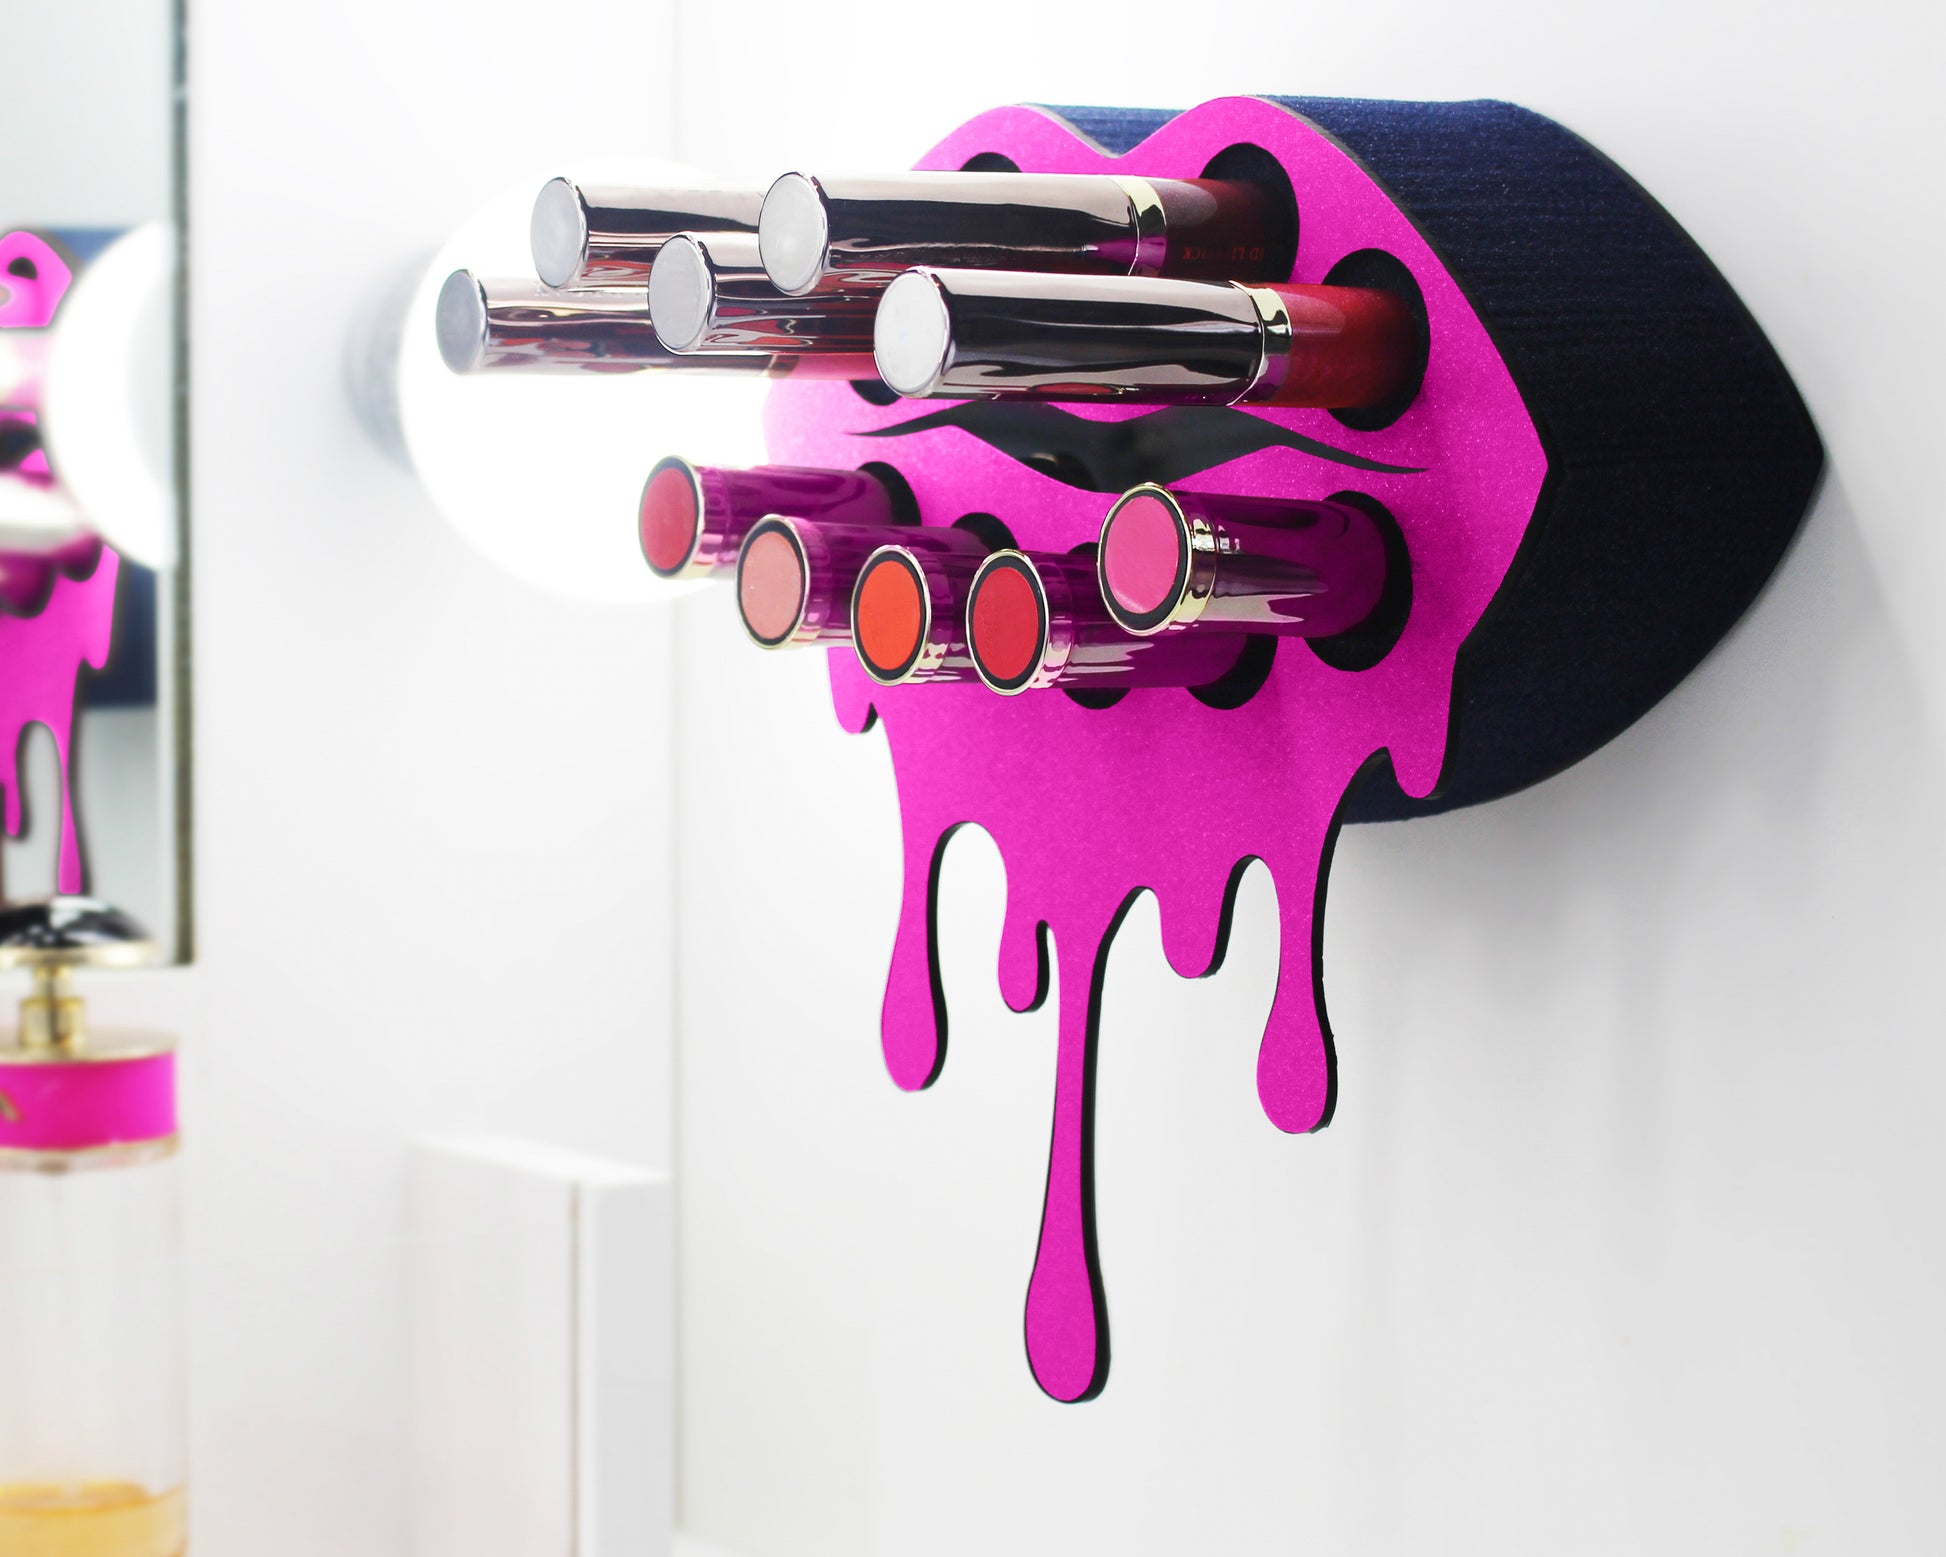 Dark Pink Small Lip Design Lipstick Organizer holding 10 lipsticks mounted on the wall with lipstick easily accessible and organized. Hanging Lipstick Holder that looks like wall art.